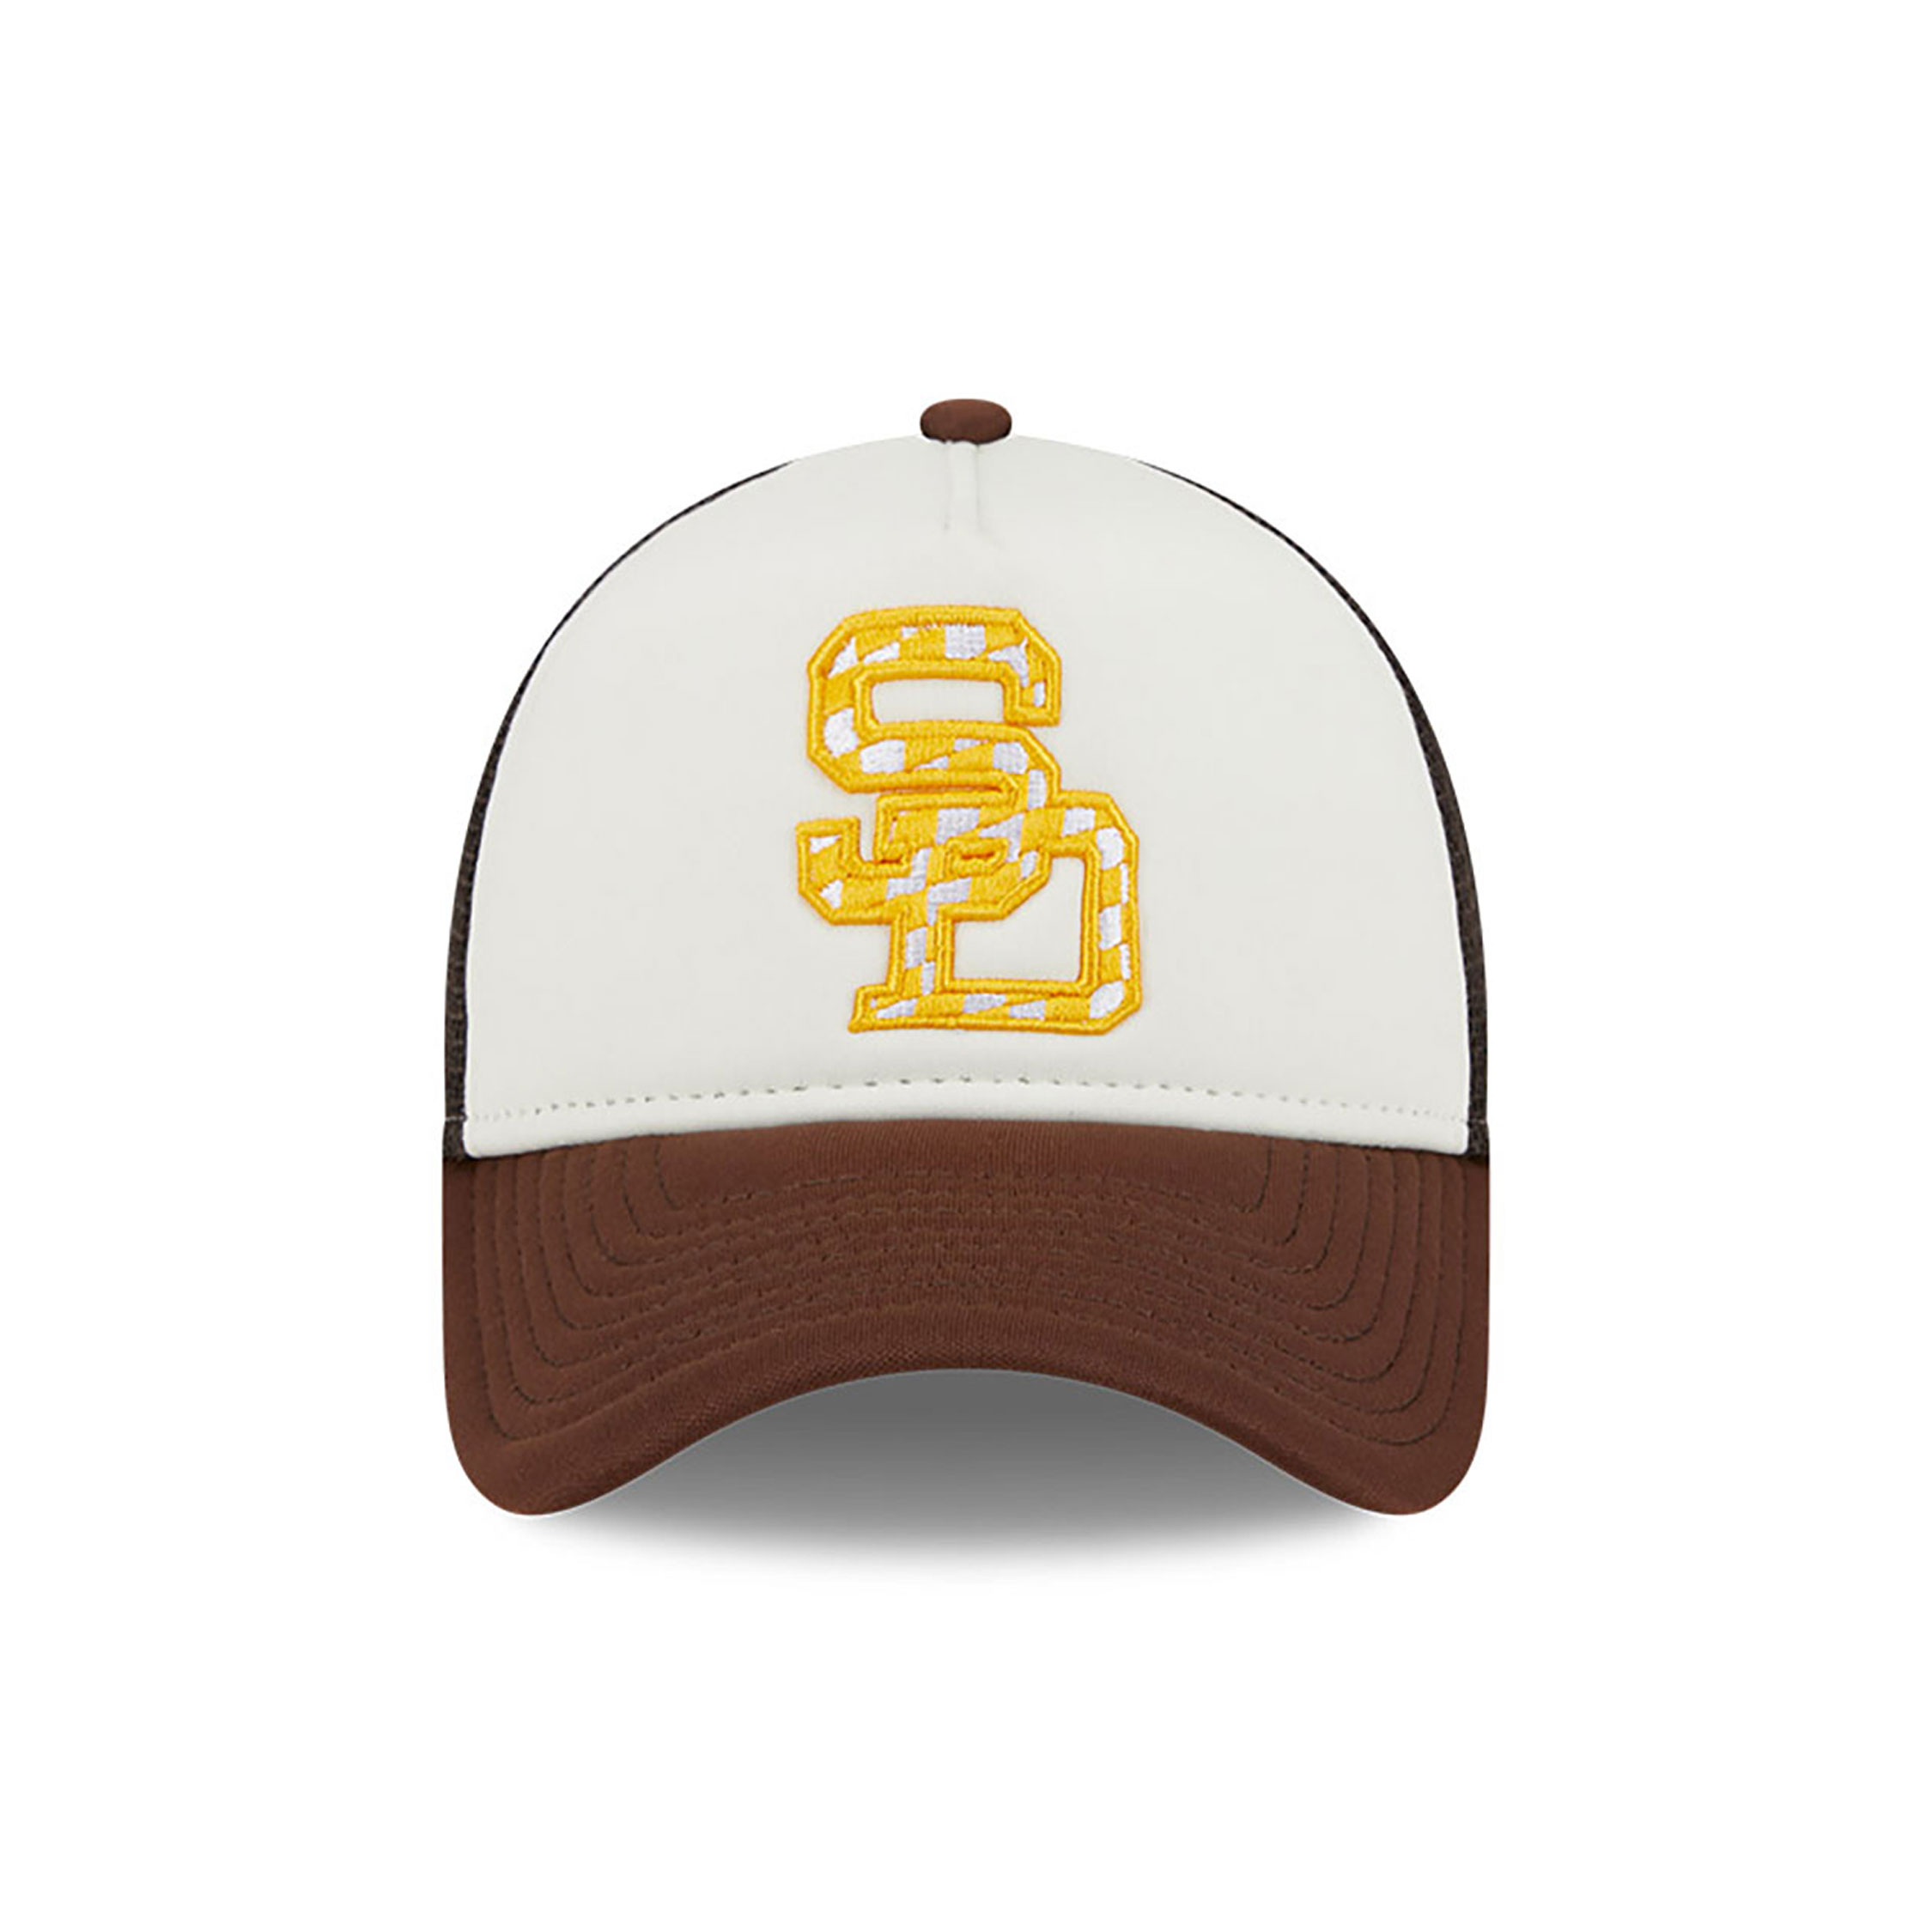 San Diego Padres Check Flag Brown 9FORTY A-Frame Adjustable Trucker Cap